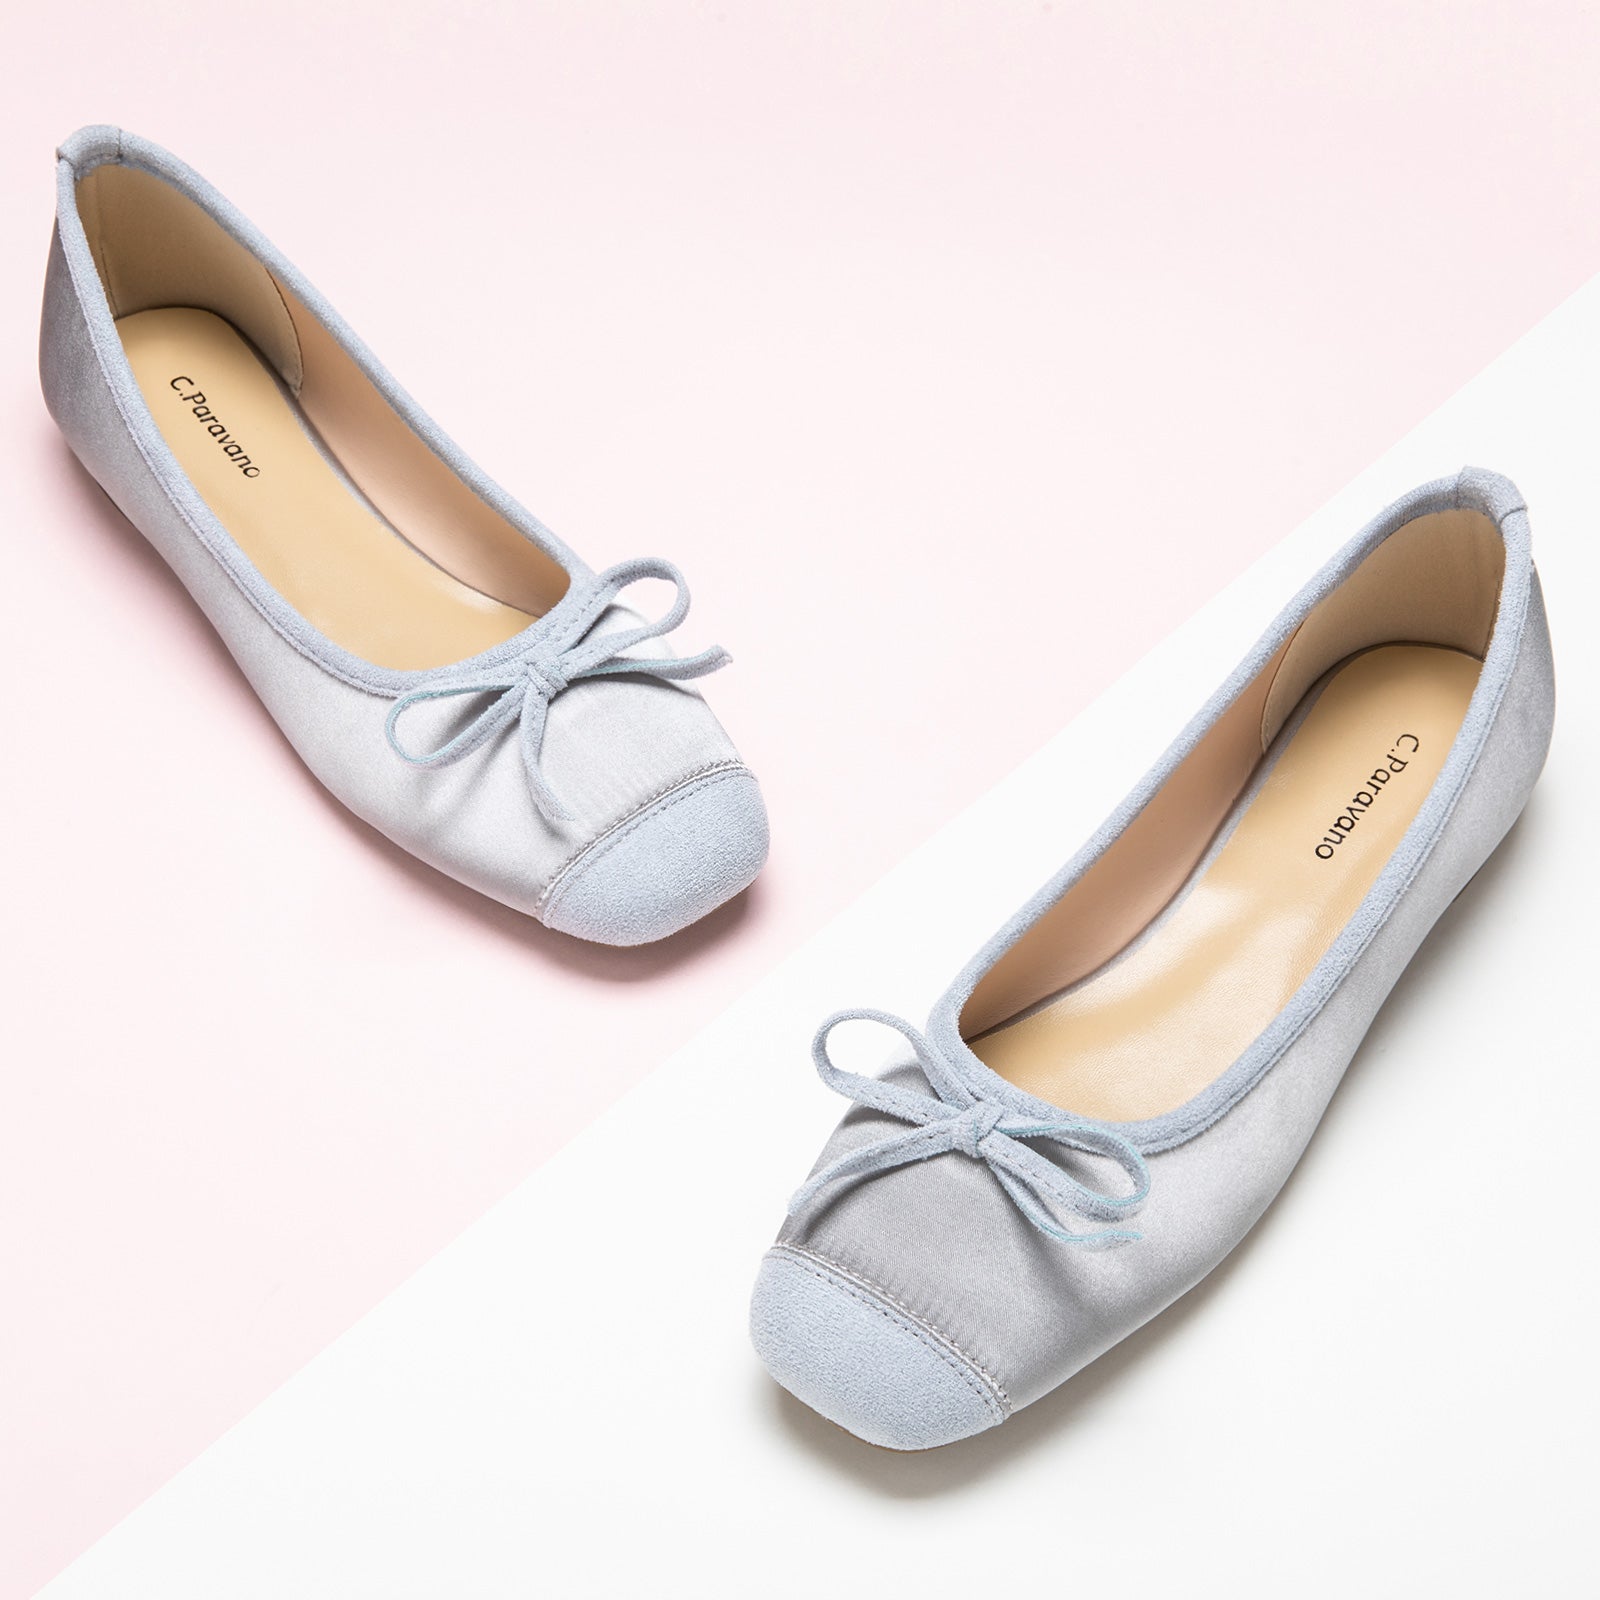 Silky Bowknot Ballet Flats in Blue, featuring a timeless design for a refined and sophisticated look